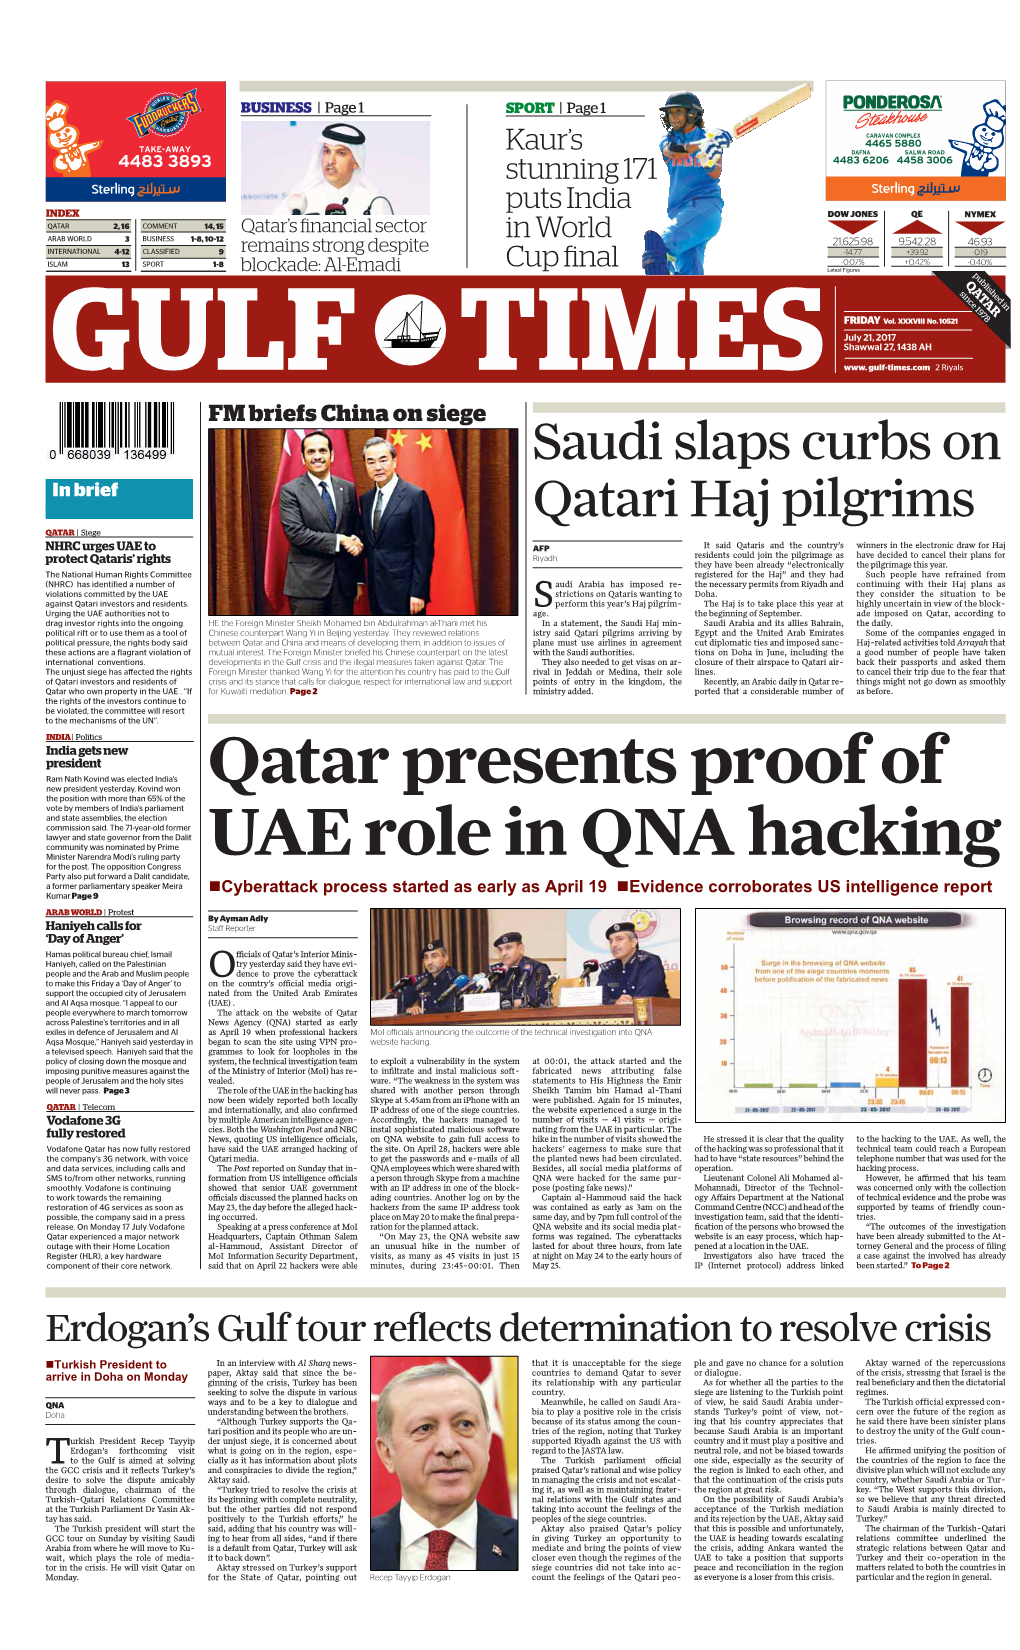 Qatar Presents Proof of UAE Role in QNA Hacking